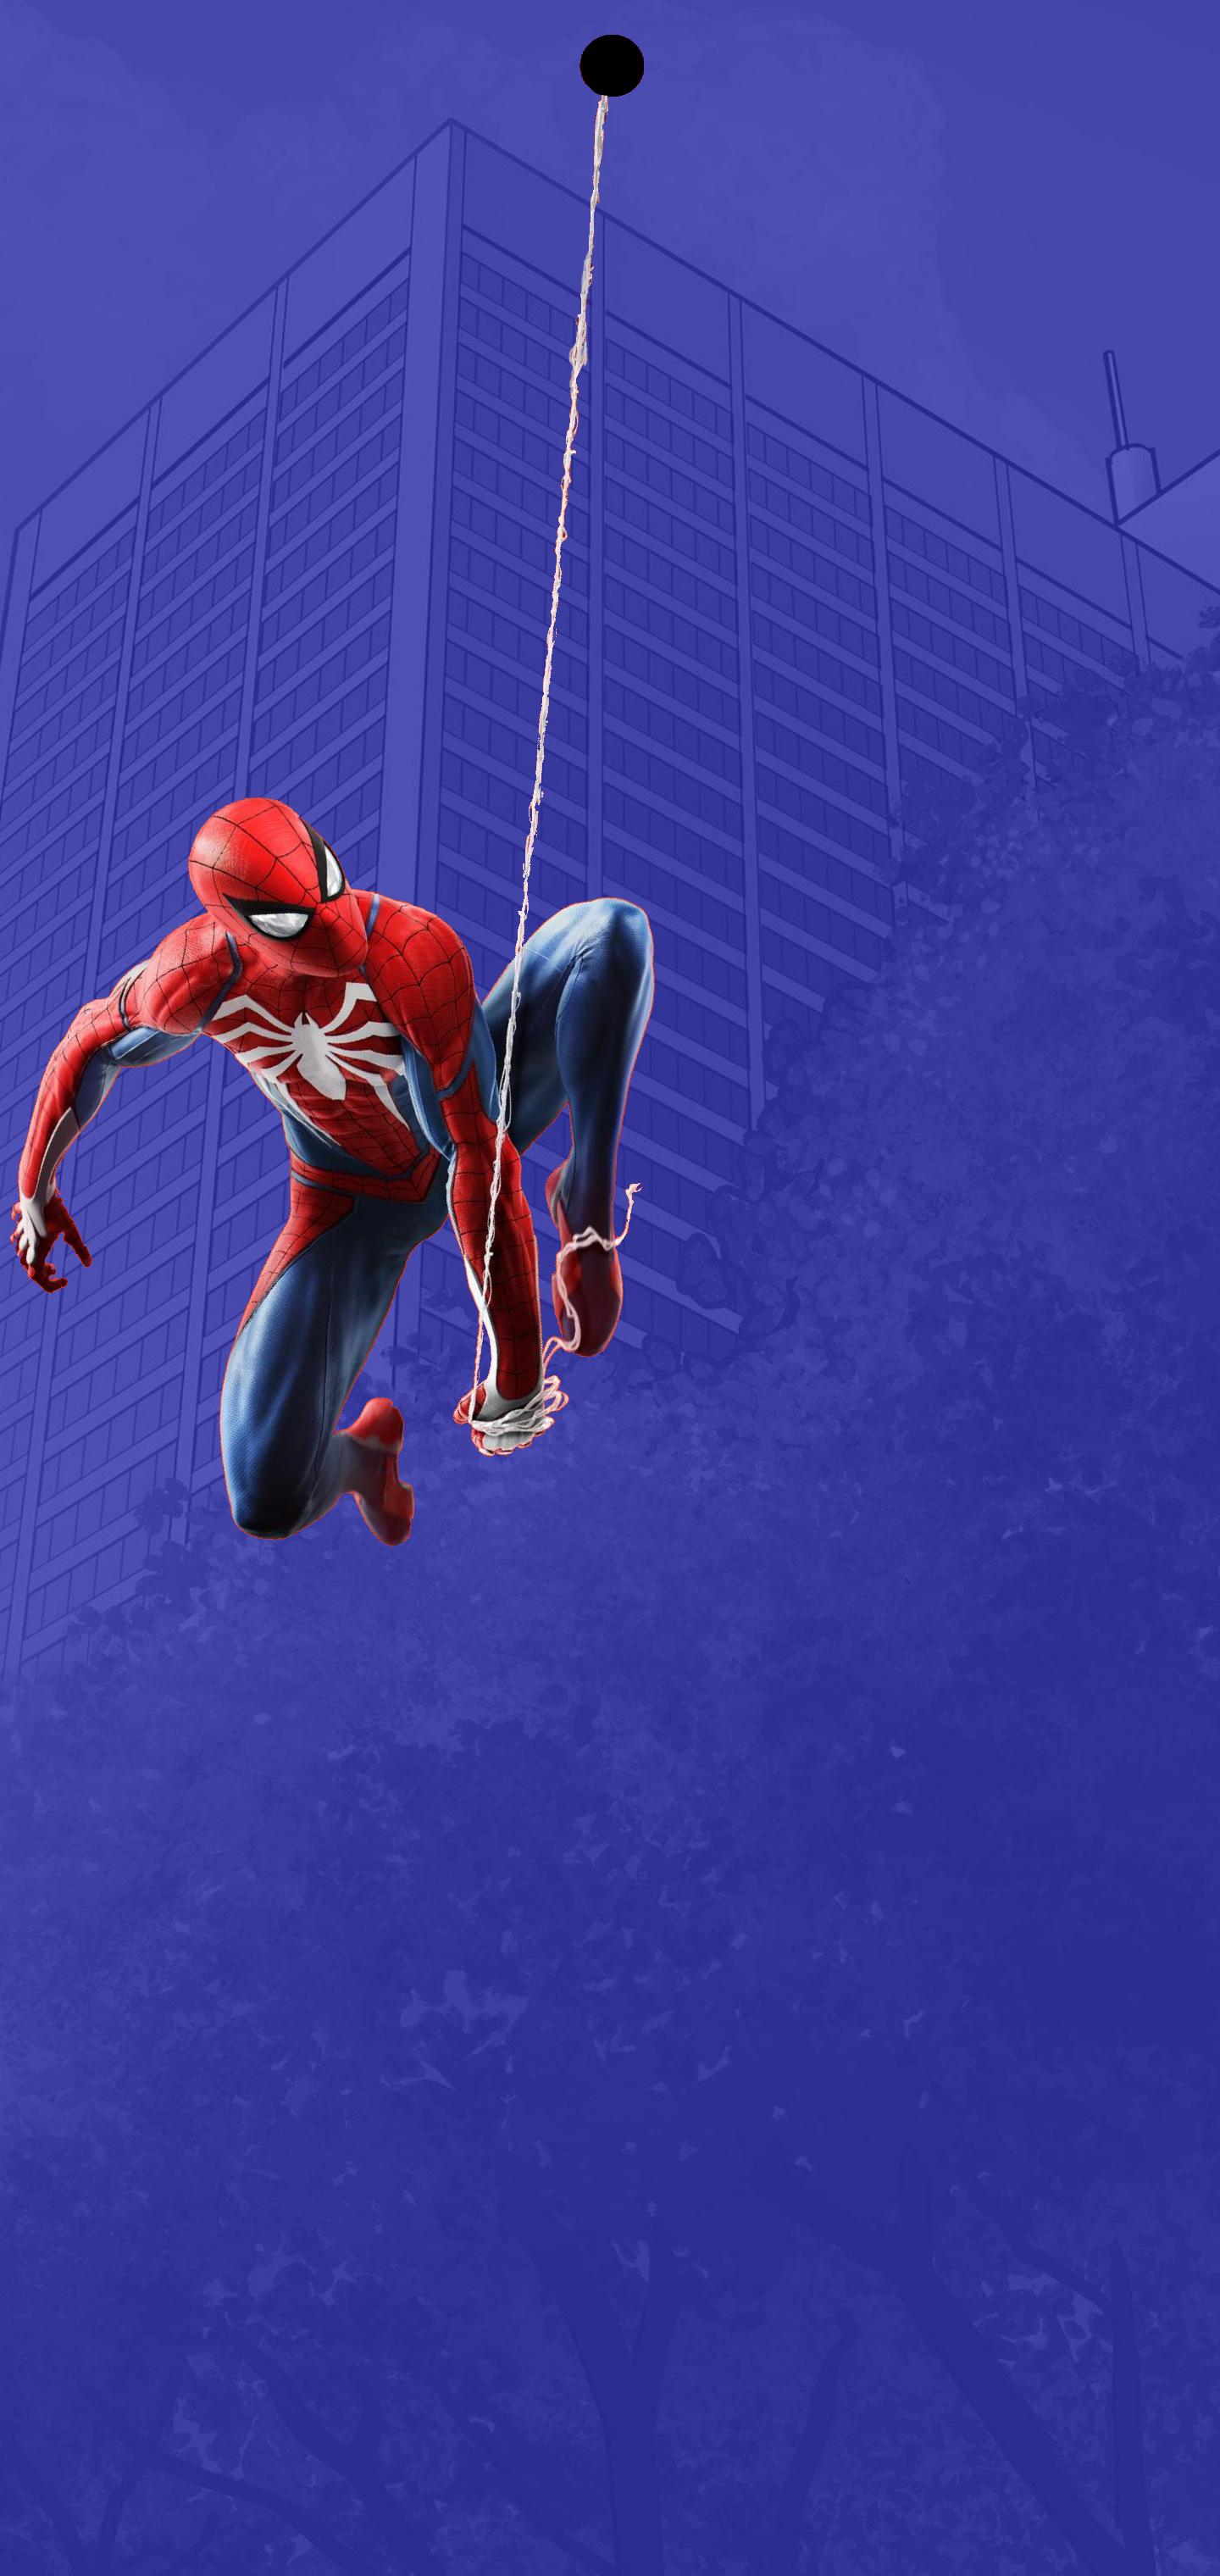 Spider man 2 - Note 10 Plus HD Wallpapers